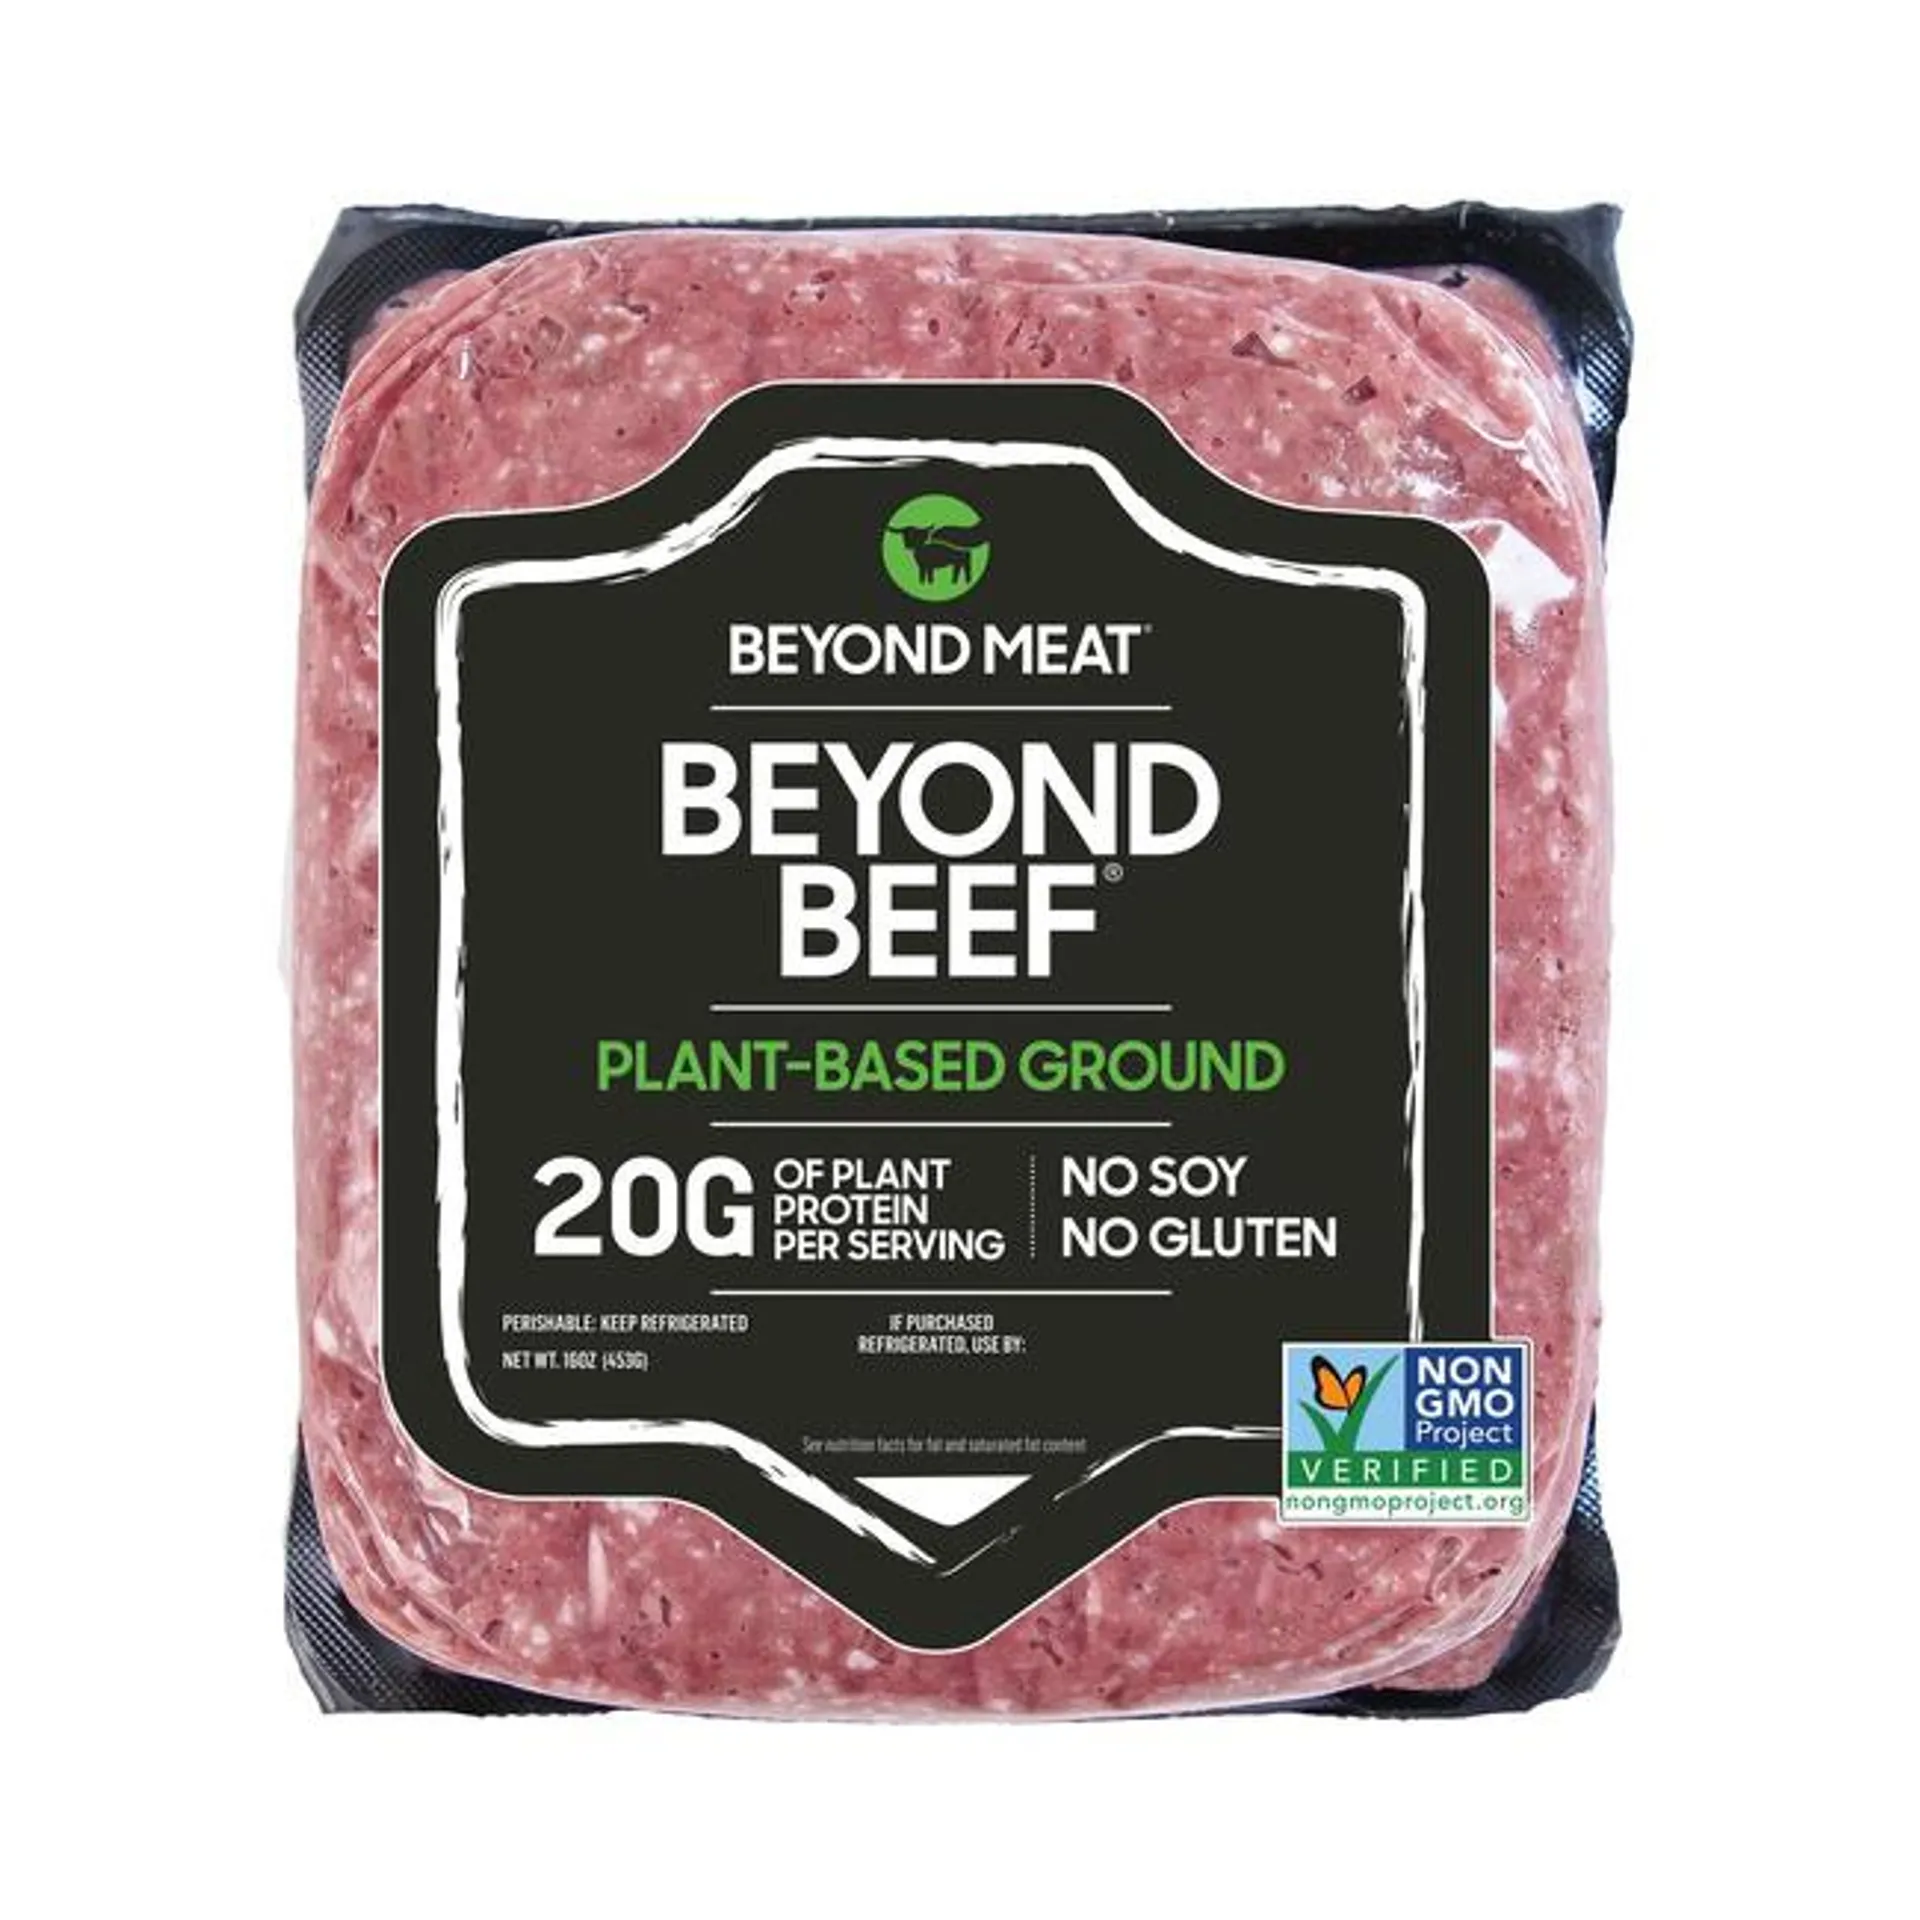 Beyond Meat Beyond Beef - Plant-Based Ground